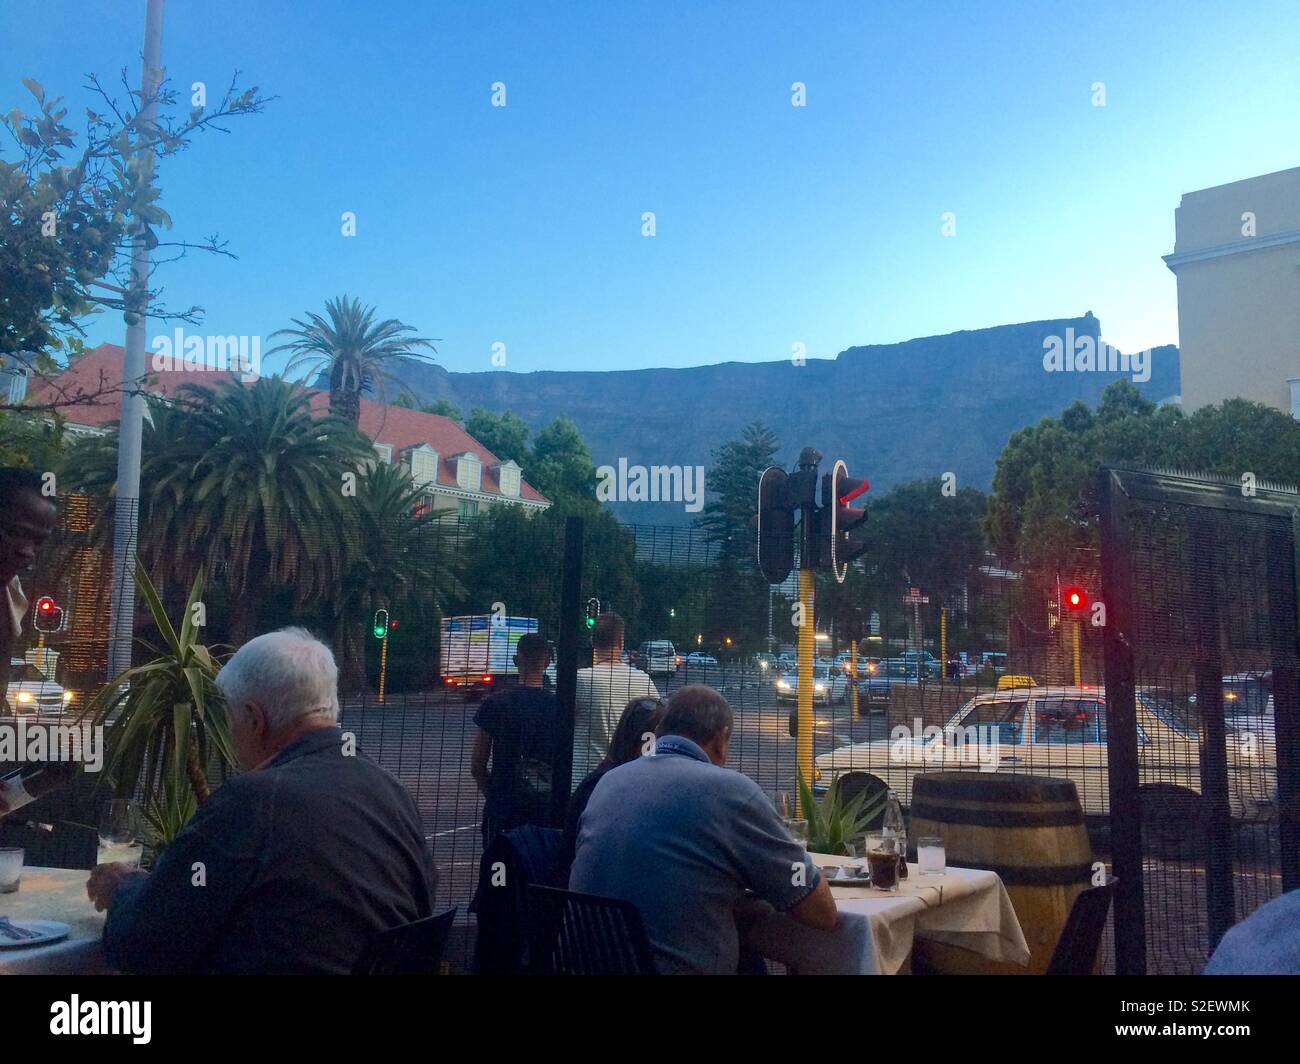 Scenic evening view of Table Mountain from outdoor restaurant with diners seated at tables in Summer Stock Photo